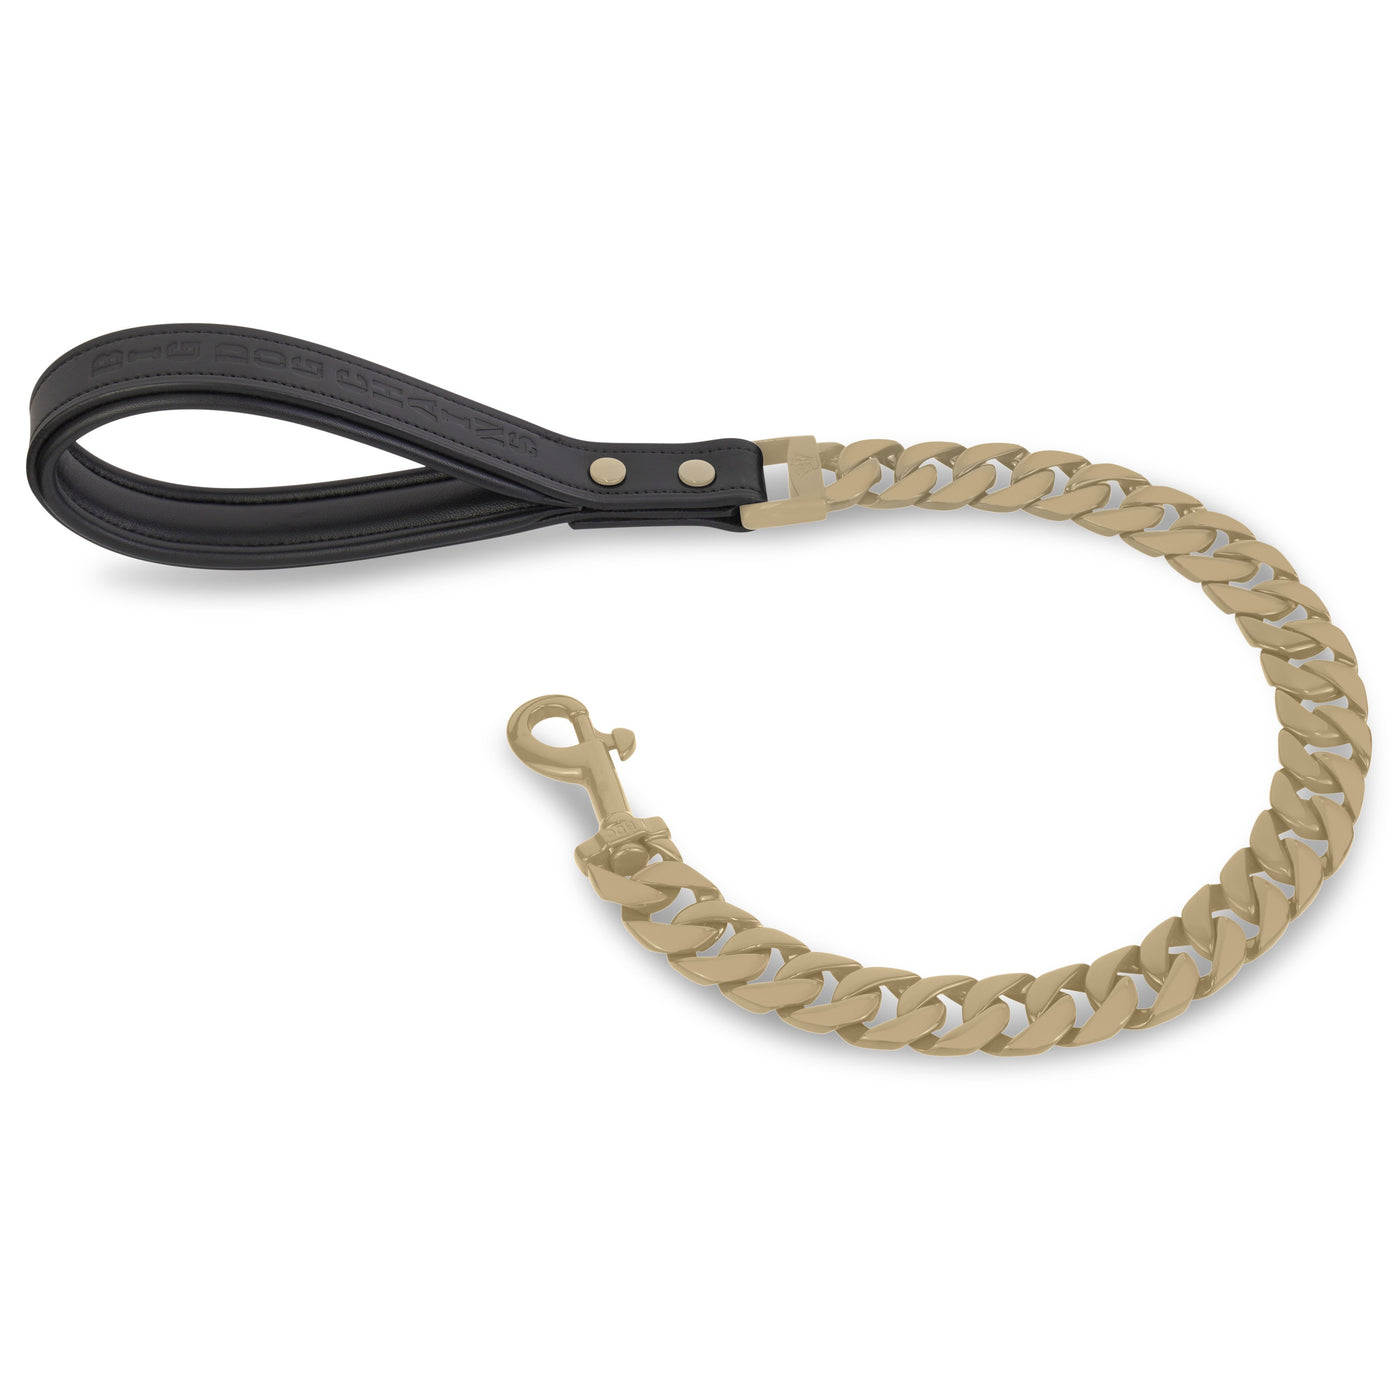 MOJAVE_Cuban_Link_Leash_and_Luxury_Lead_for_Strong_Dogs_Guaranteed_to_Last_for_Life_Ideal_for_XL_Dog_Breeds_Like_XL_Bully_Cane_Corso_Bull_Mastiff_Bulldog_and_More_BIG_DOG_CHAINS